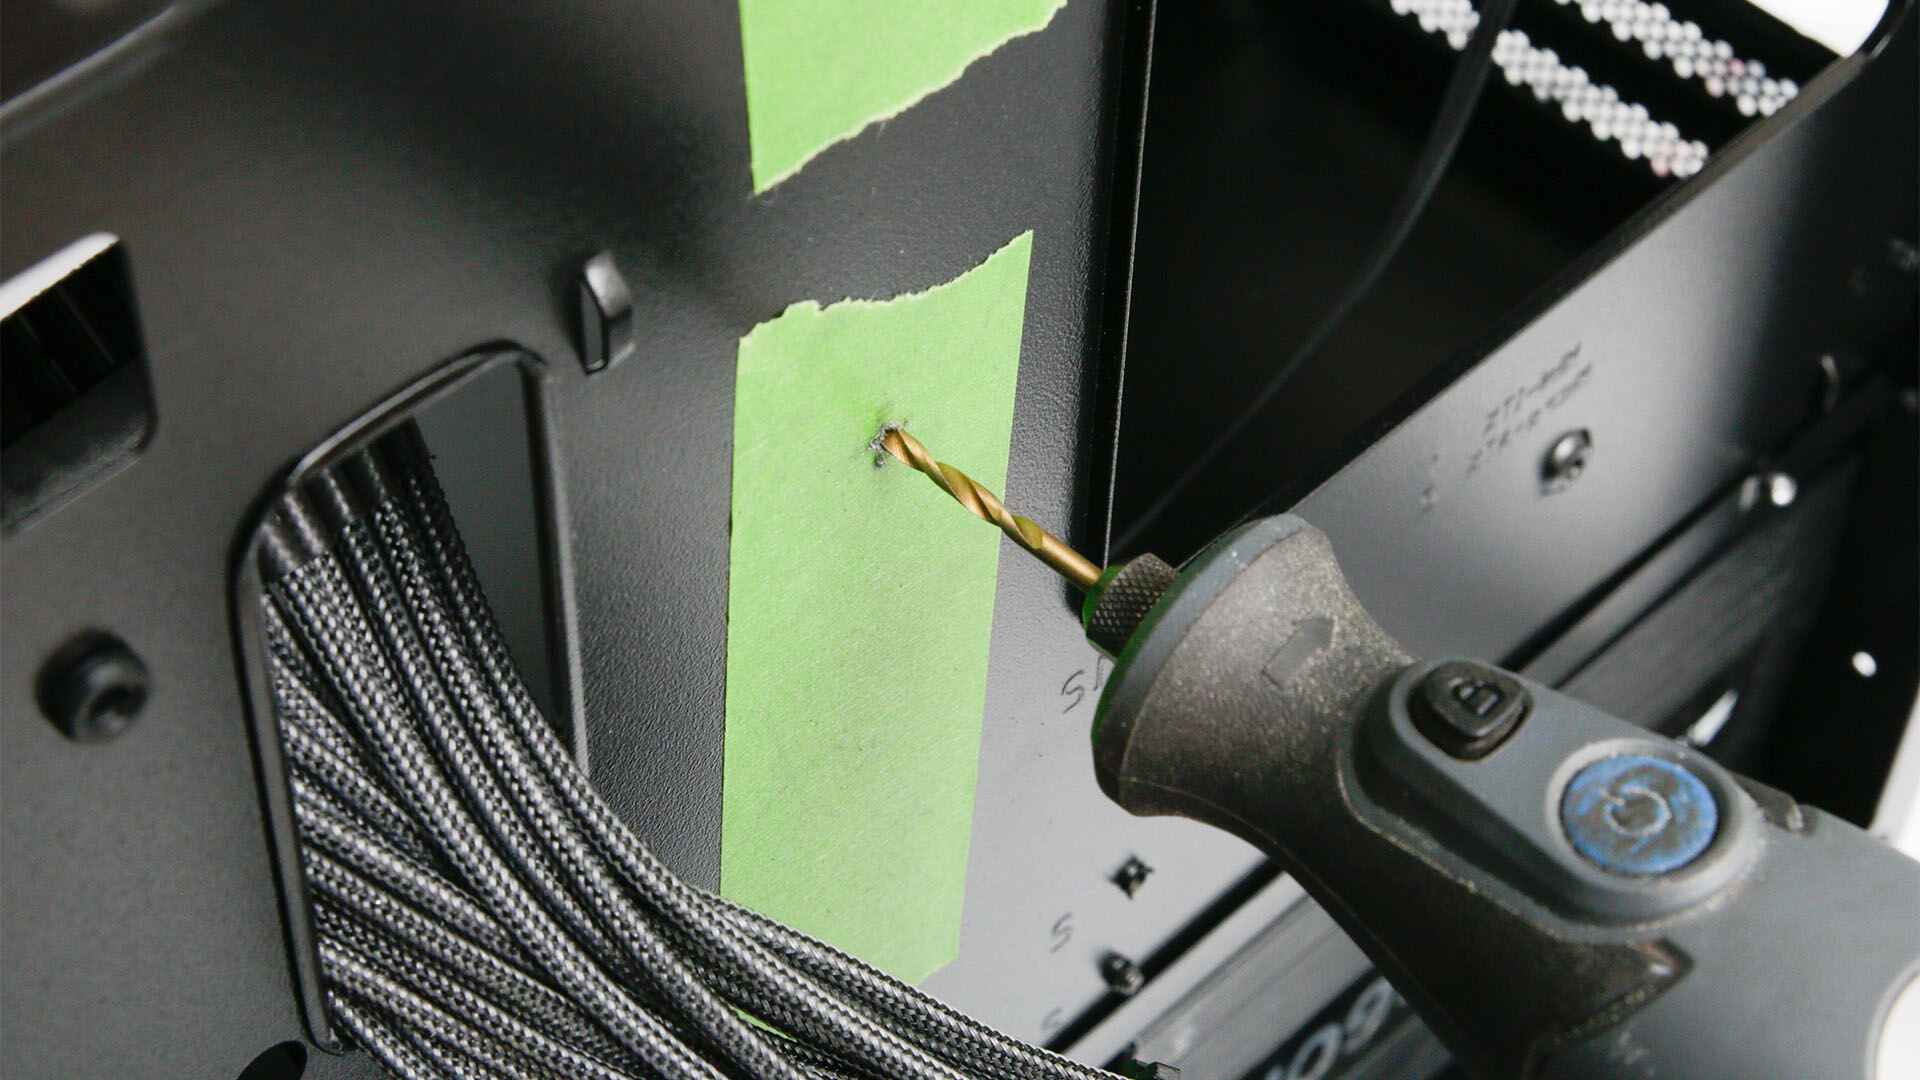 How To Drill Hole In PC Case